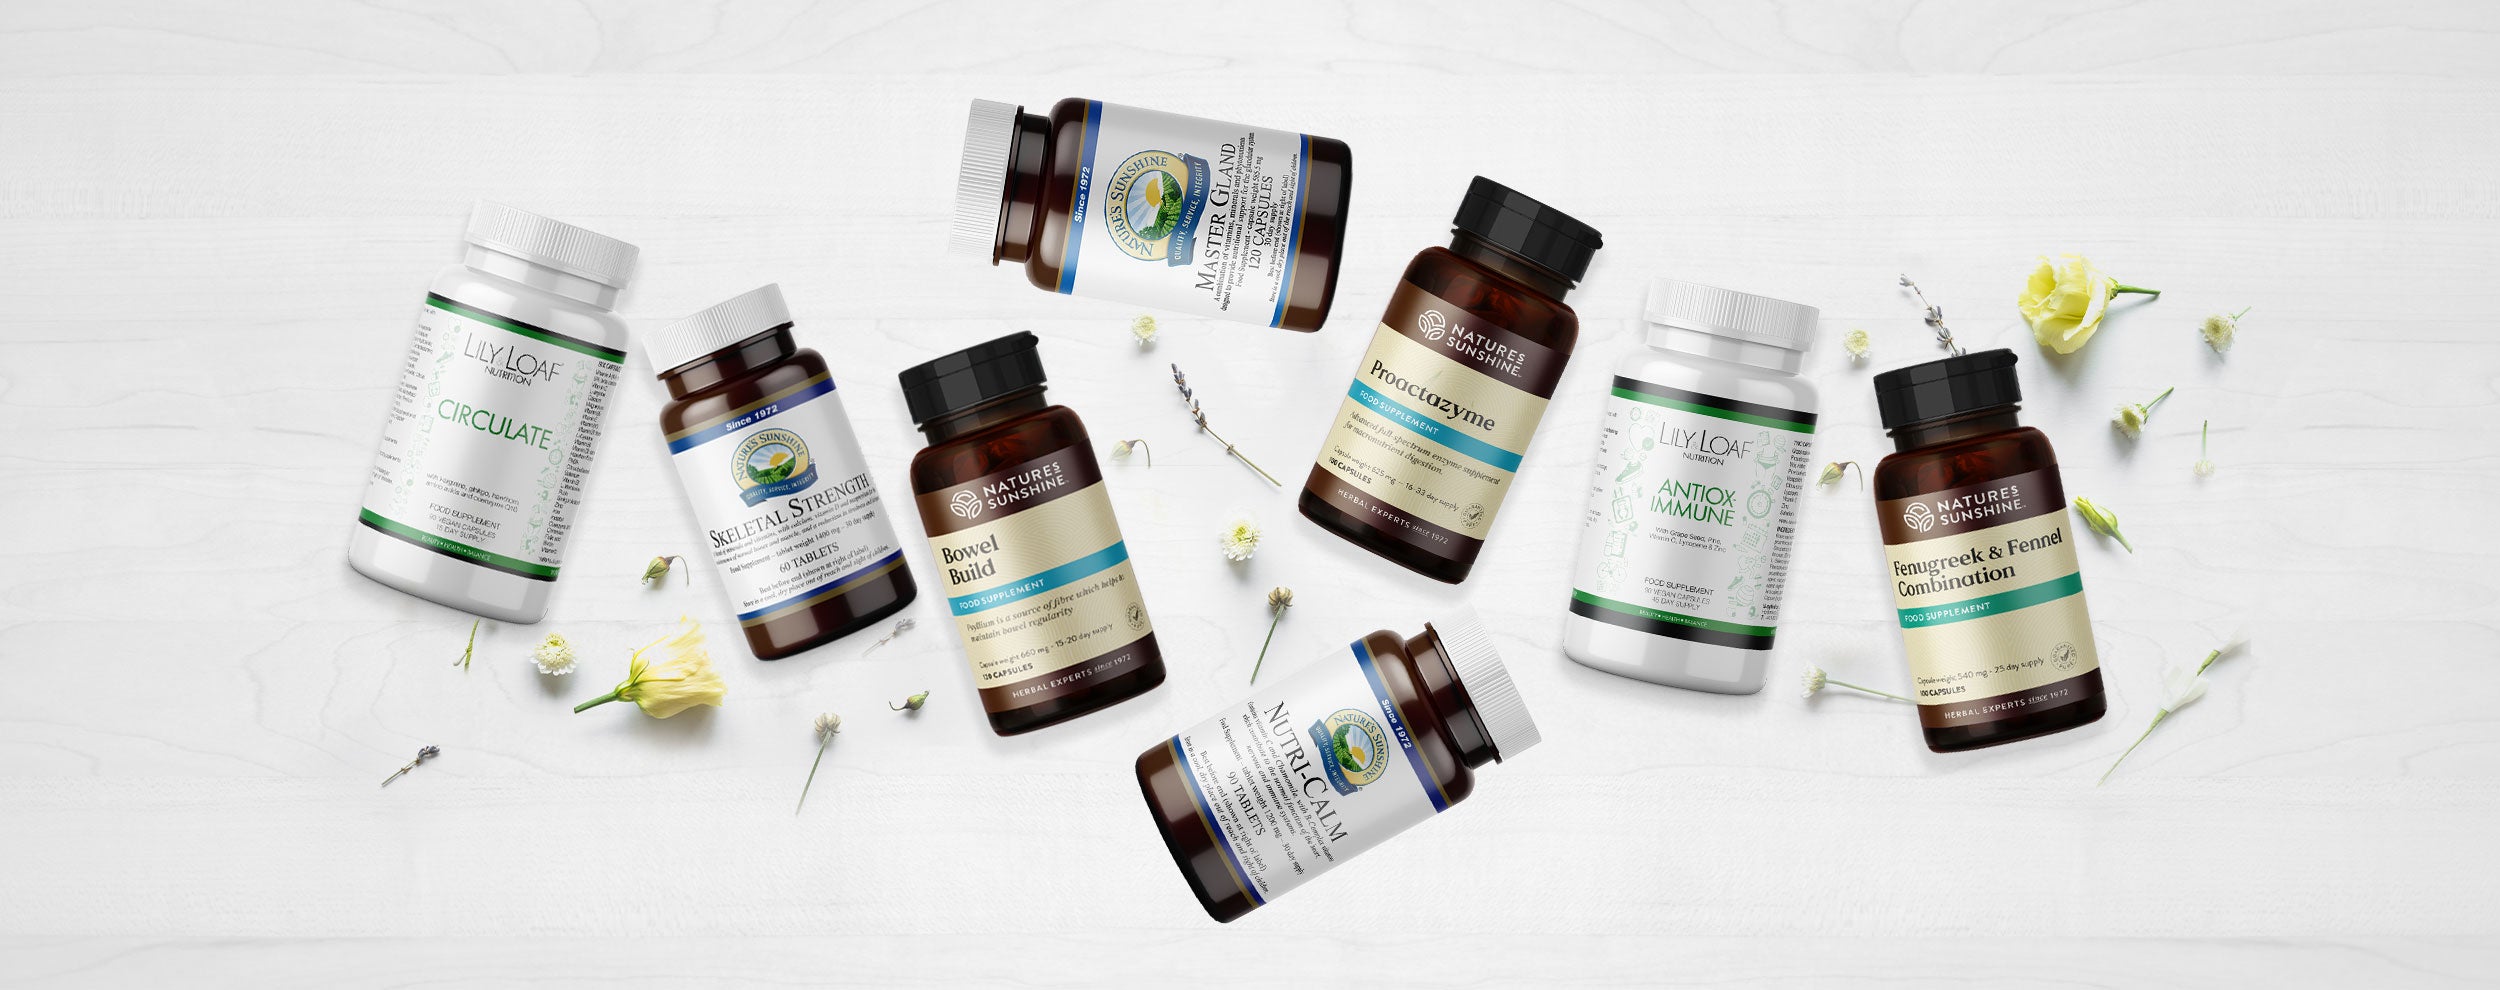 Array of Lily & Loaf's nutritional supplements, enhancing health with nature's finest ingredients.